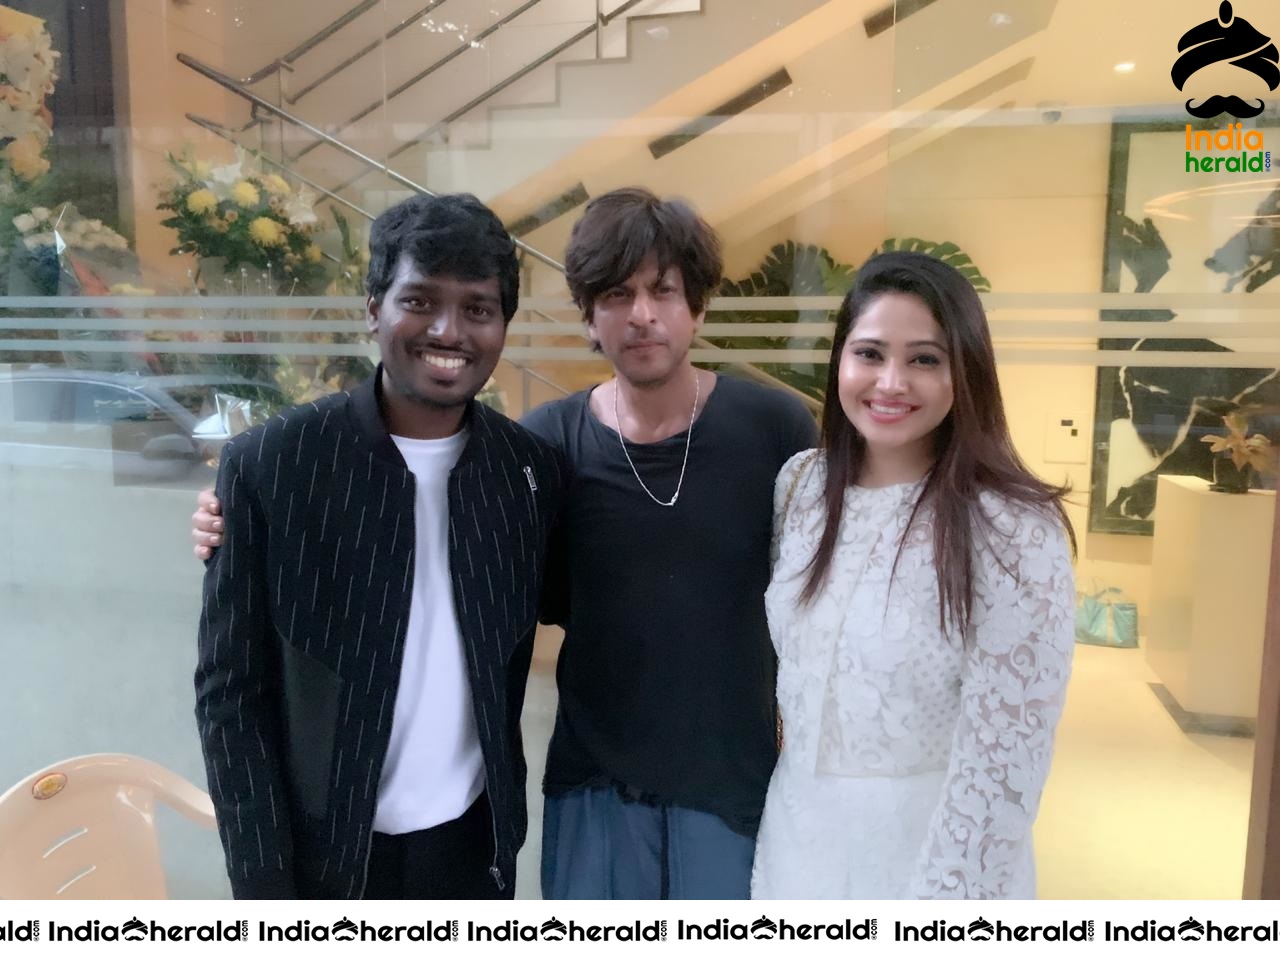 Actor Shah Rukh Khan with Director Atlee and his wife Priya